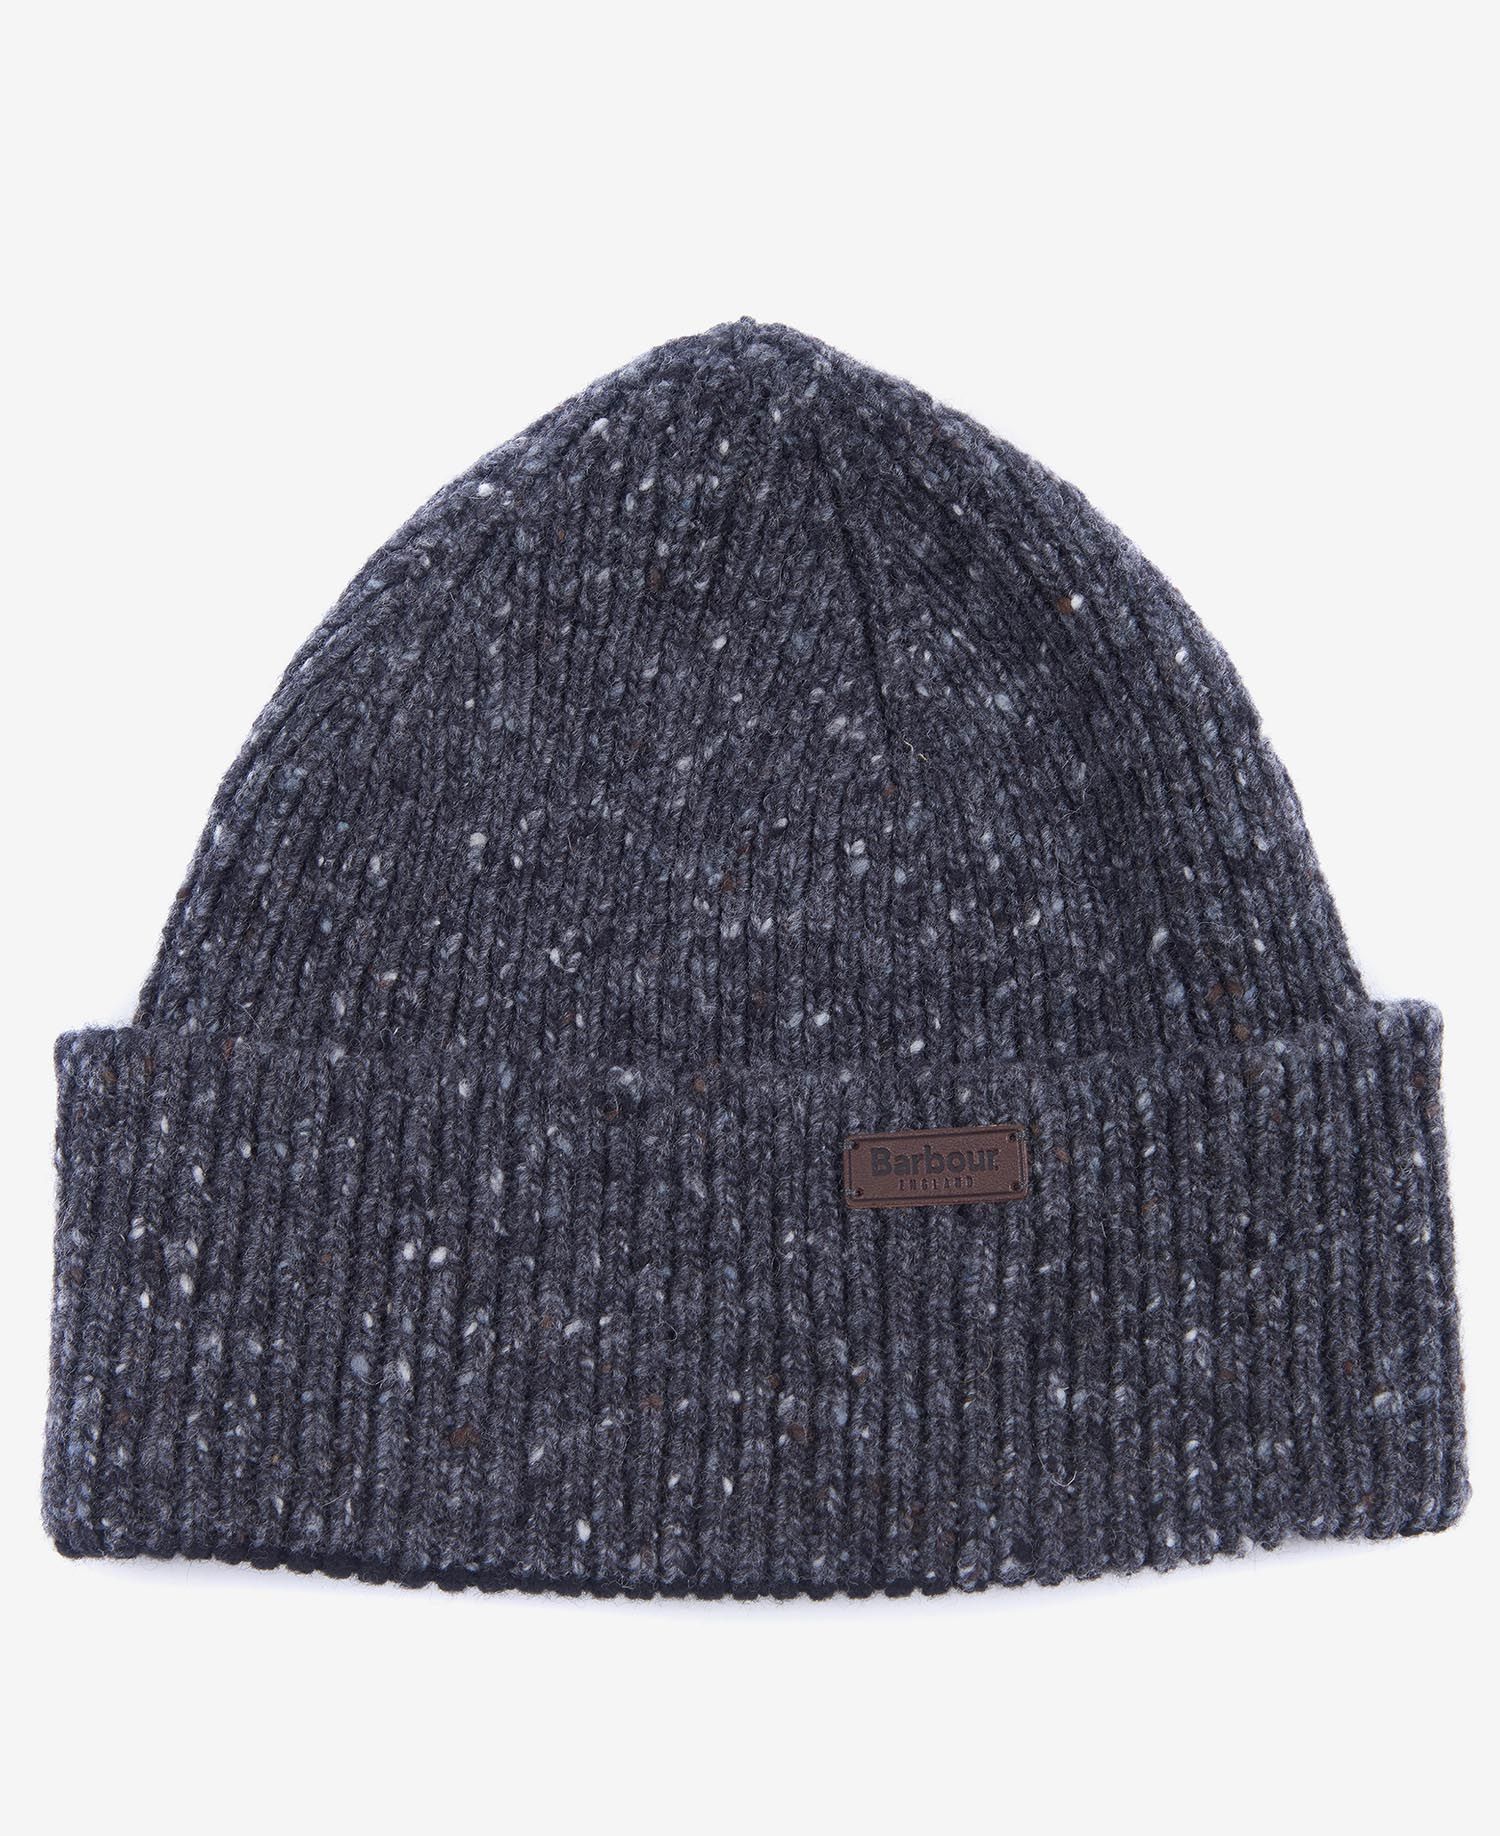 Charcoal Donegal Beanie